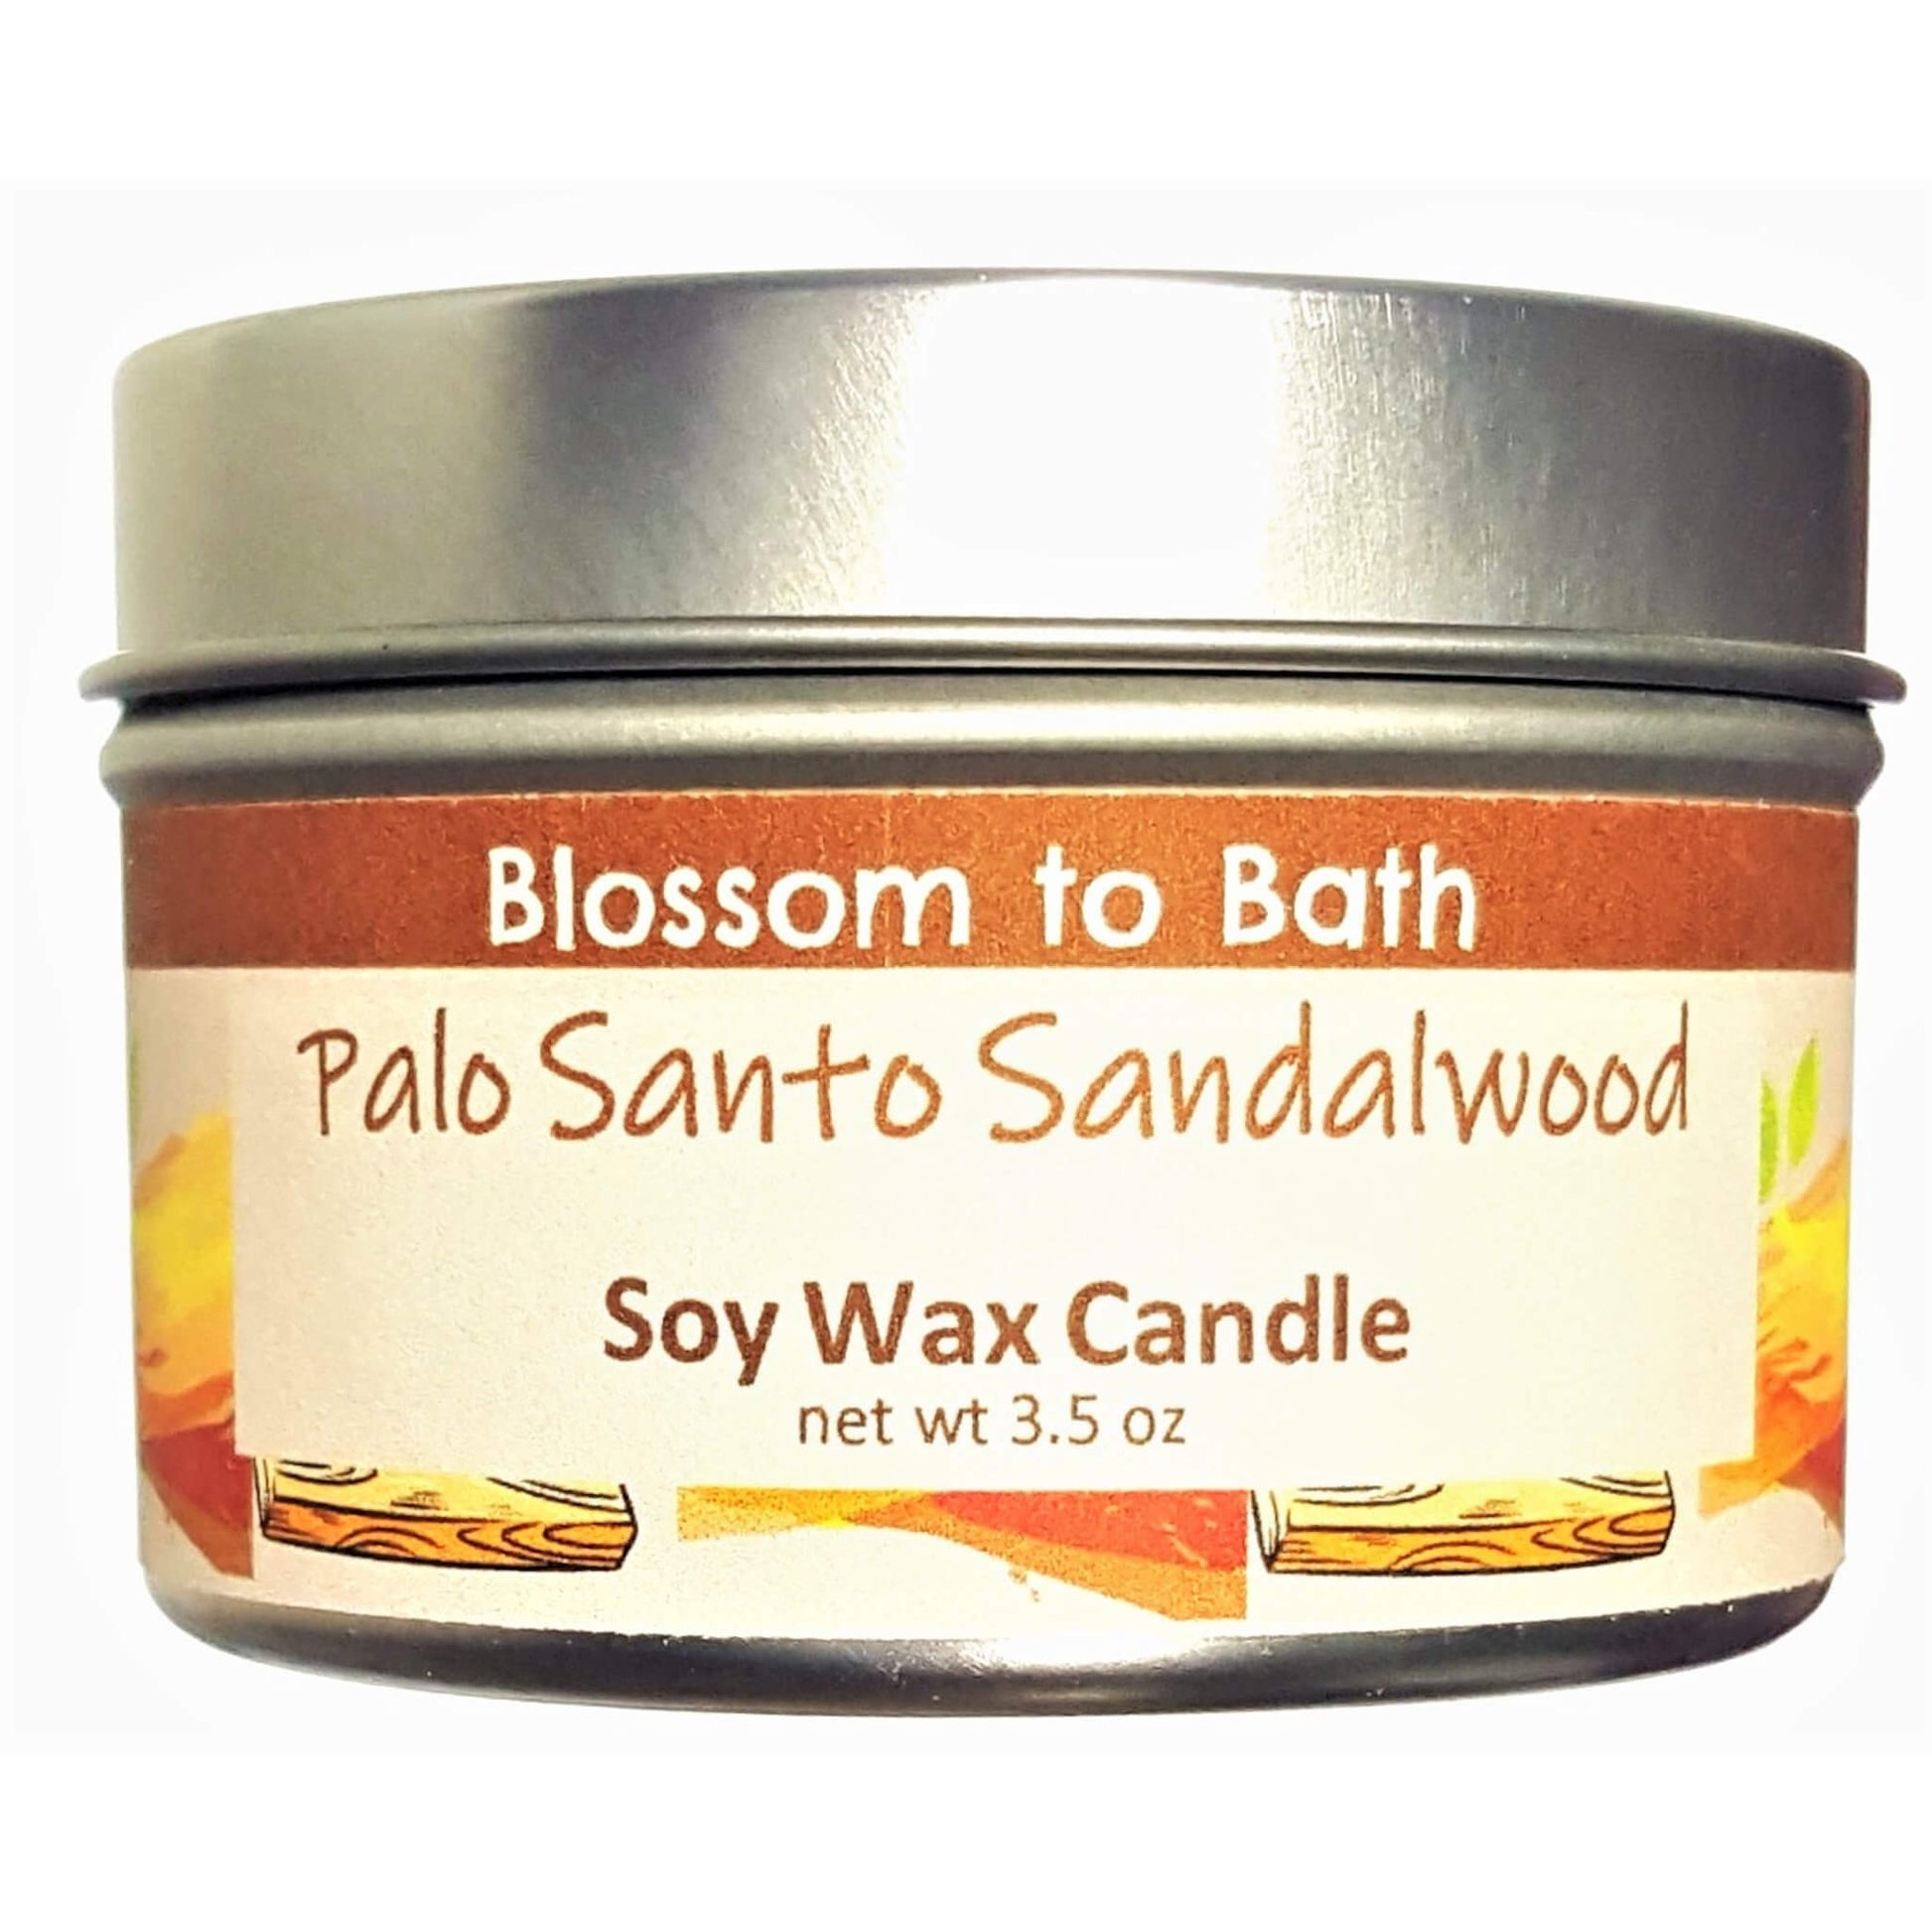 Buy Blossom to Bath Palo Santo Sandalwood Soy Wax Candle from Flowersong Soap Studio.  Fill the air with a charming fragrance that lasts for hours  A journey into the sacred, the exotic tones of this special blend resonate with warm woodiness that adds an uplifting vibration.